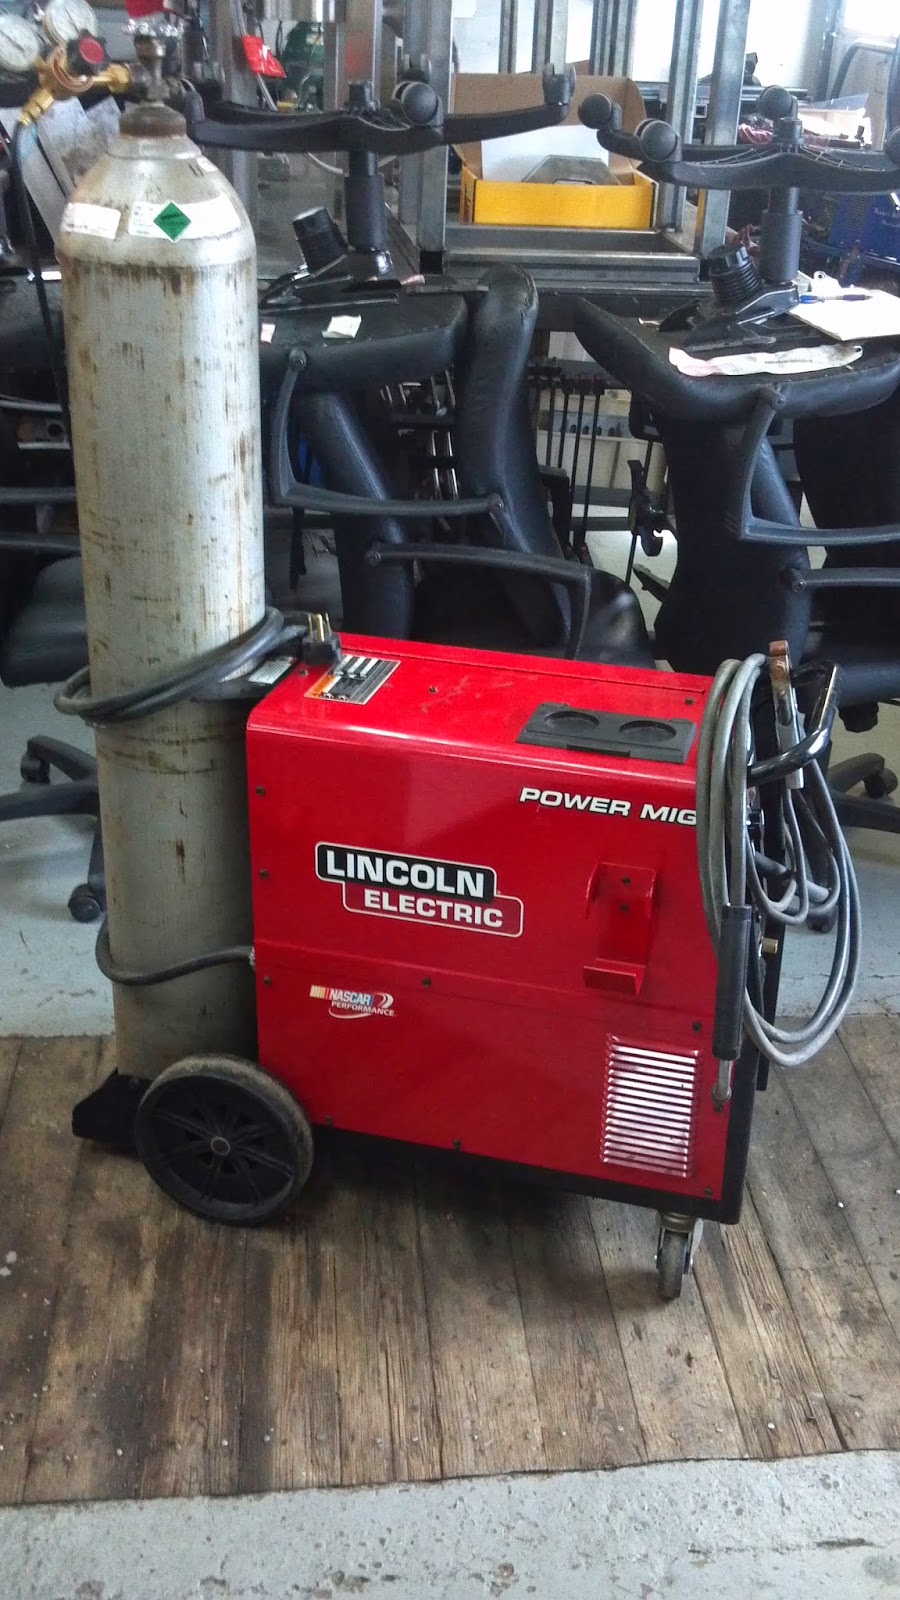 FOR SALE: Lincoln 256 Power Mig - everything needed included - ready to wel...